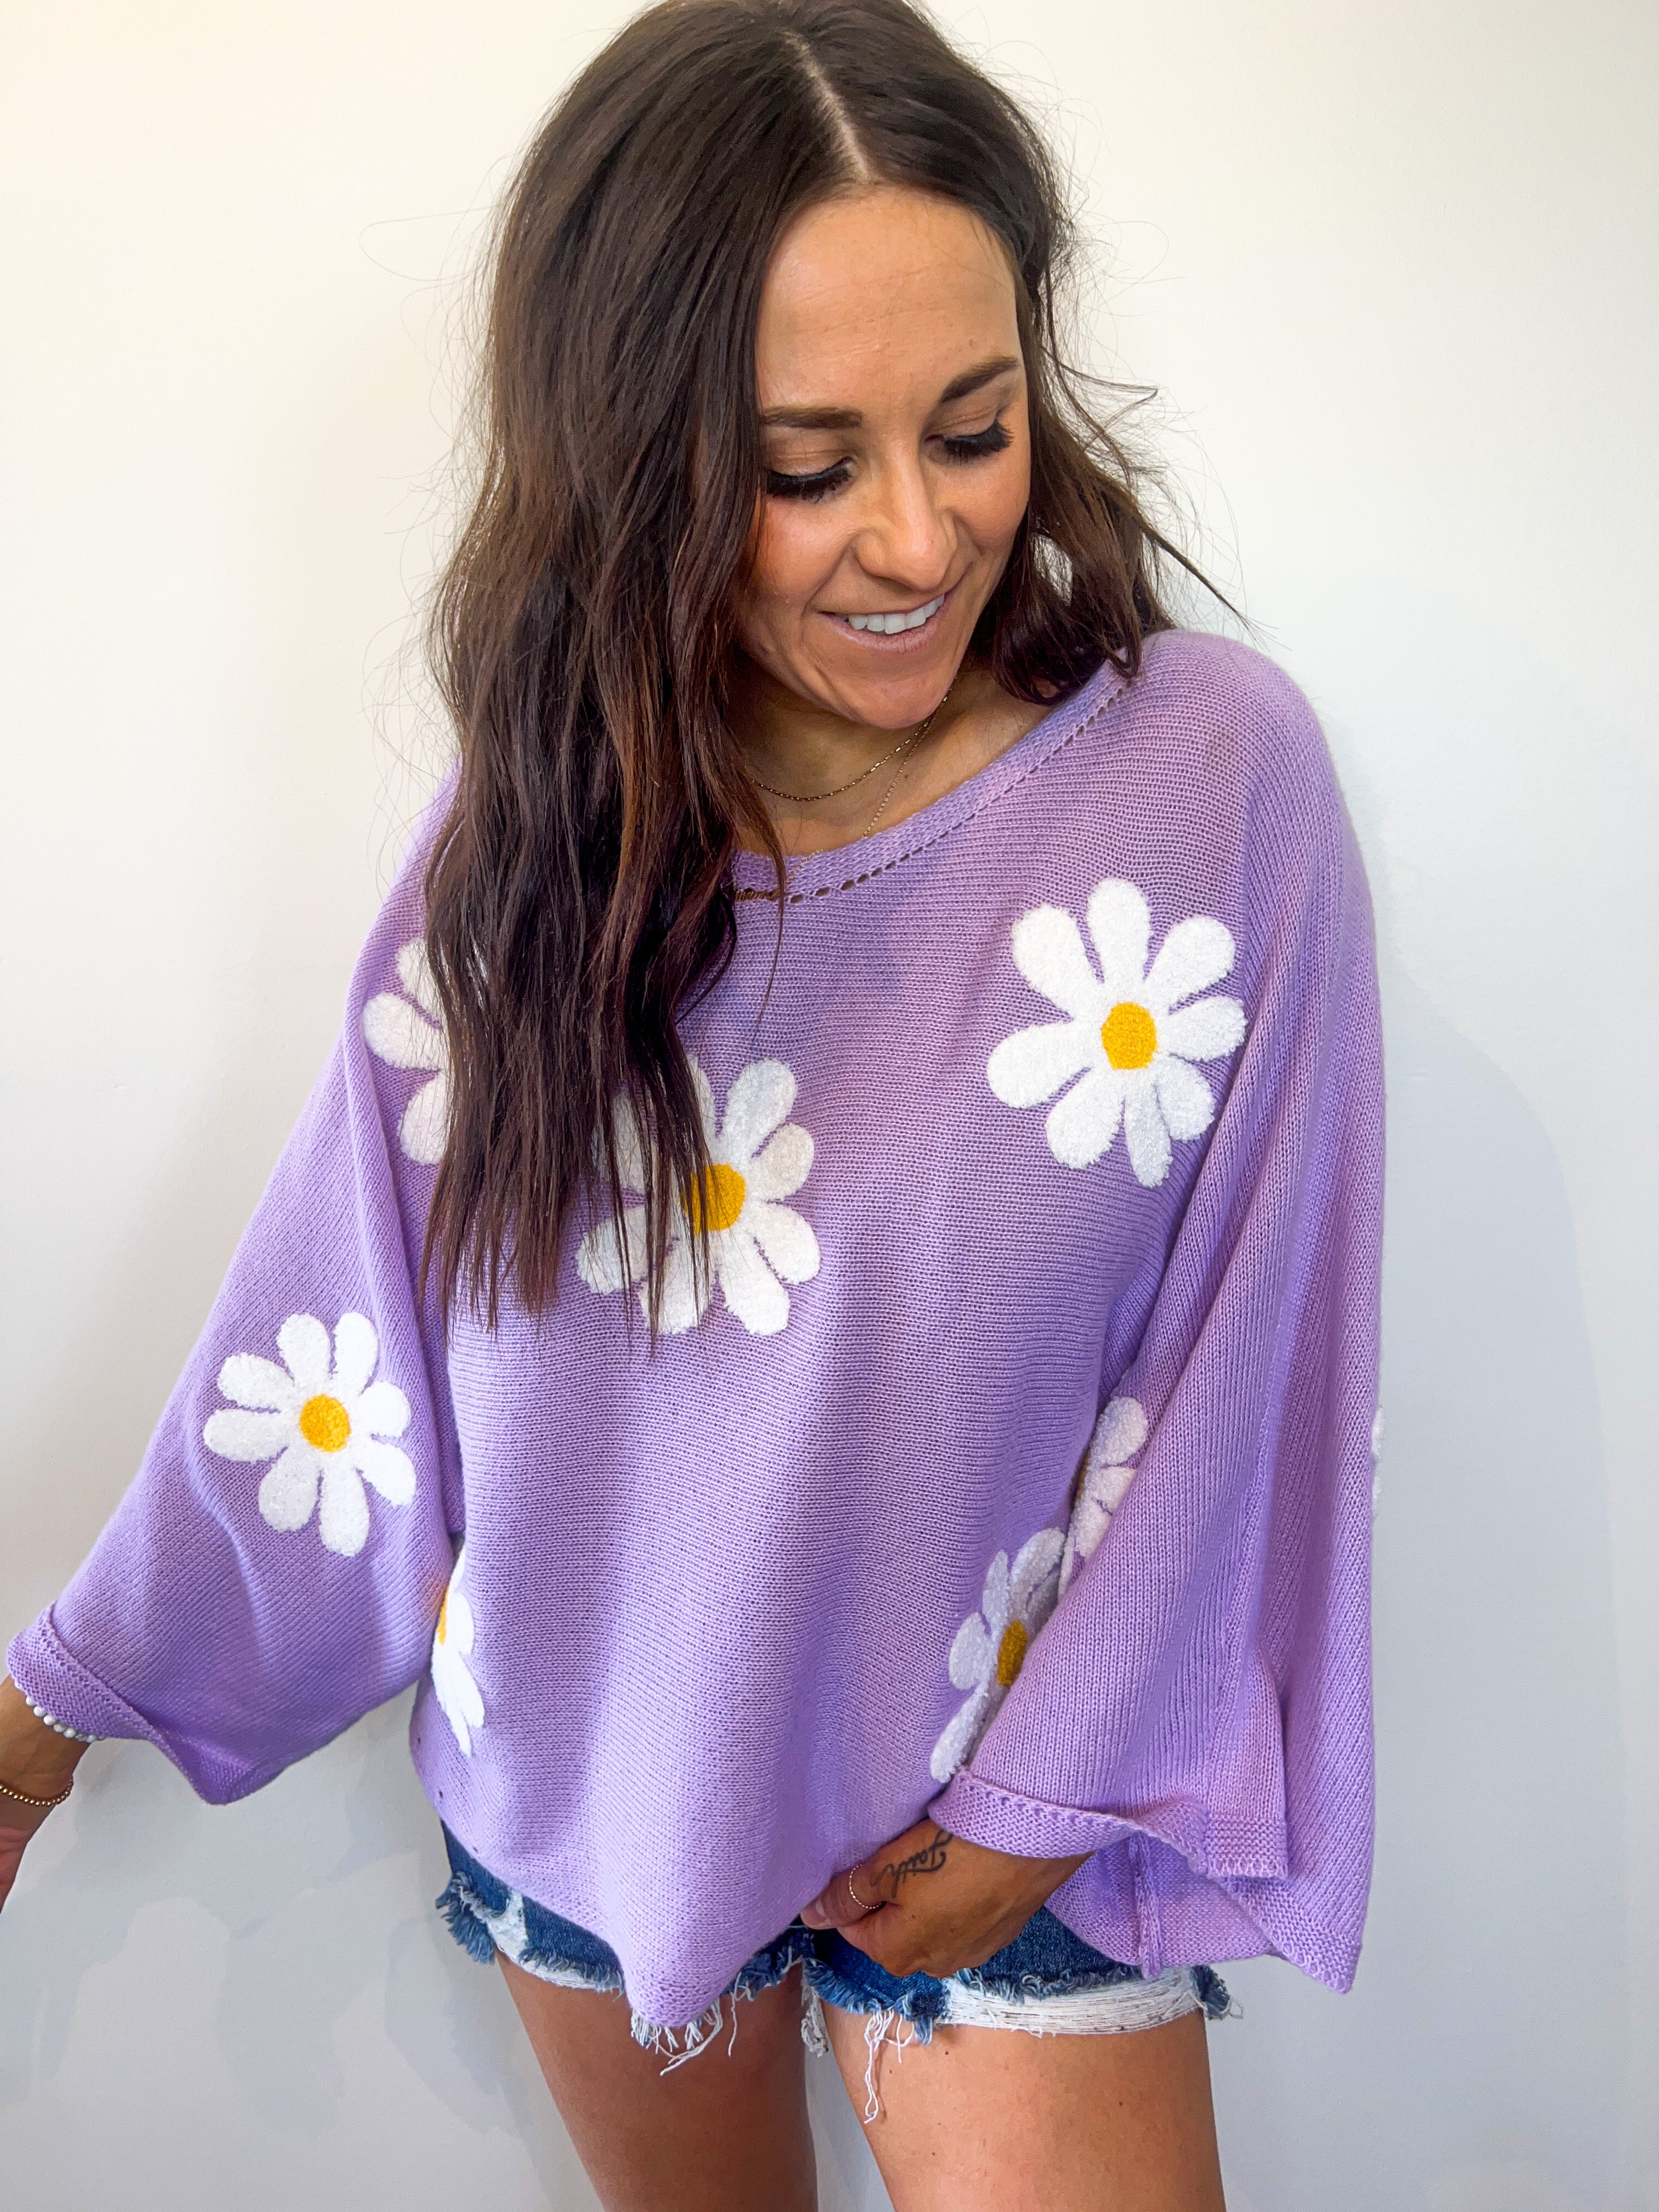 Brown Eyes Baby Lavender Daisy Embroidered Lightweight Sweater